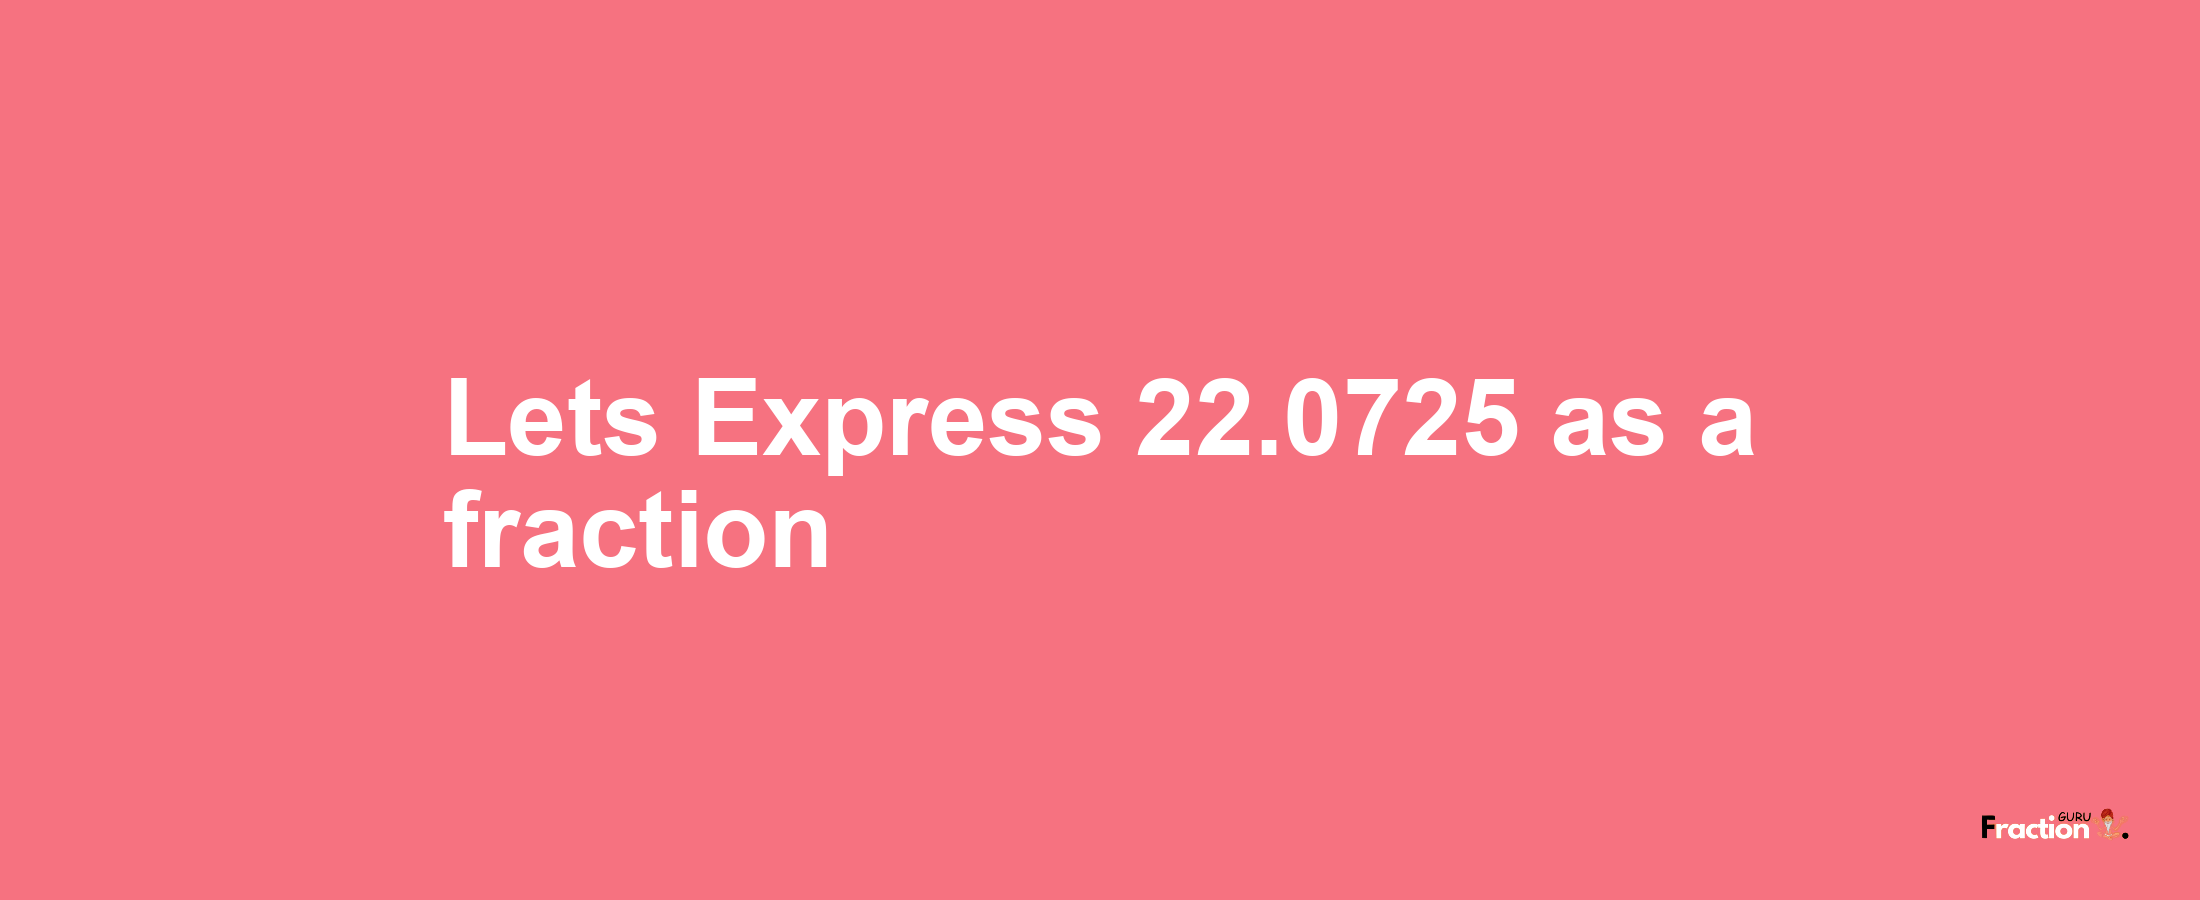 Lets Express 22.0725 as afraction